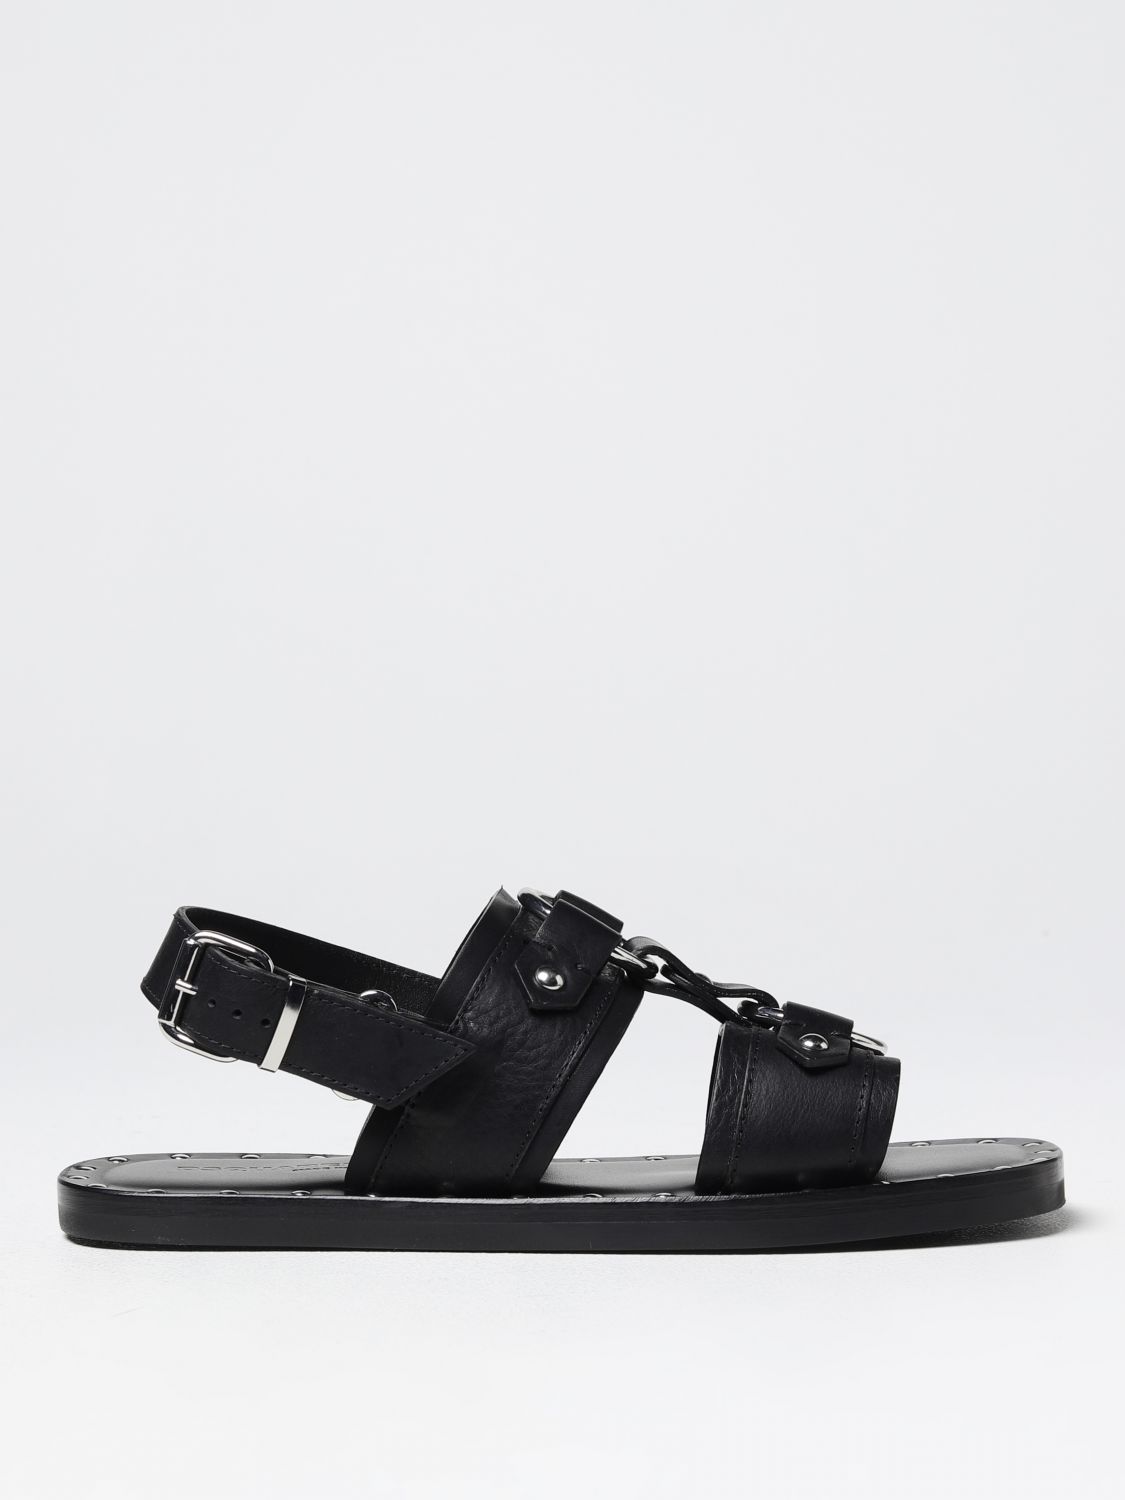 DSQUARED2 HARLEY DSQUARED2 SANDALS IN LEATHER,E22401002